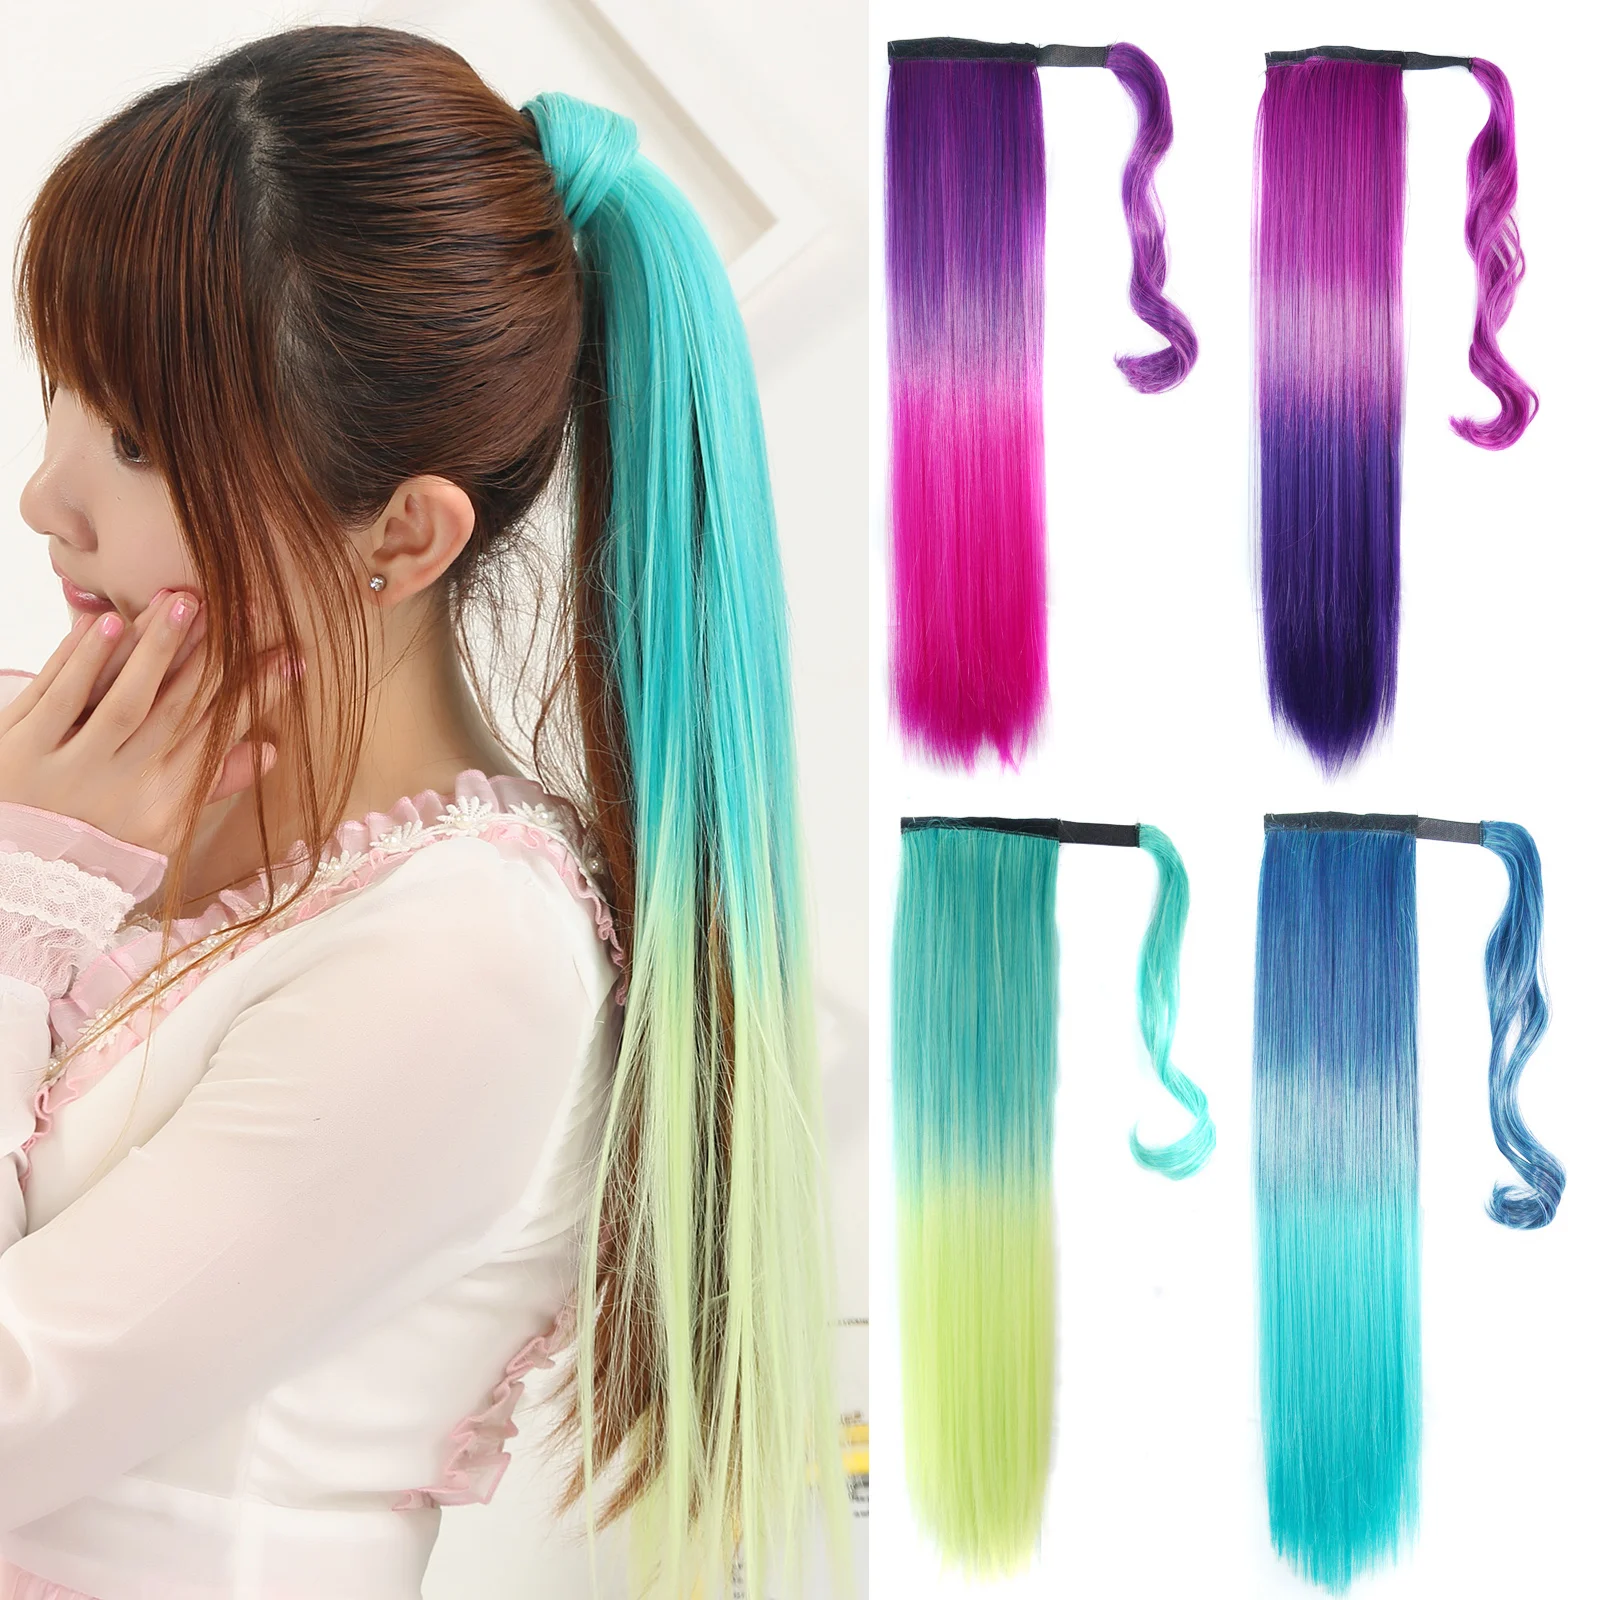 

Zolin Long Straight Synthetic Ponytail Hair Extension Wrap Around Ponytails Green Pink Purple Ombre Color Hairpiece For Girls